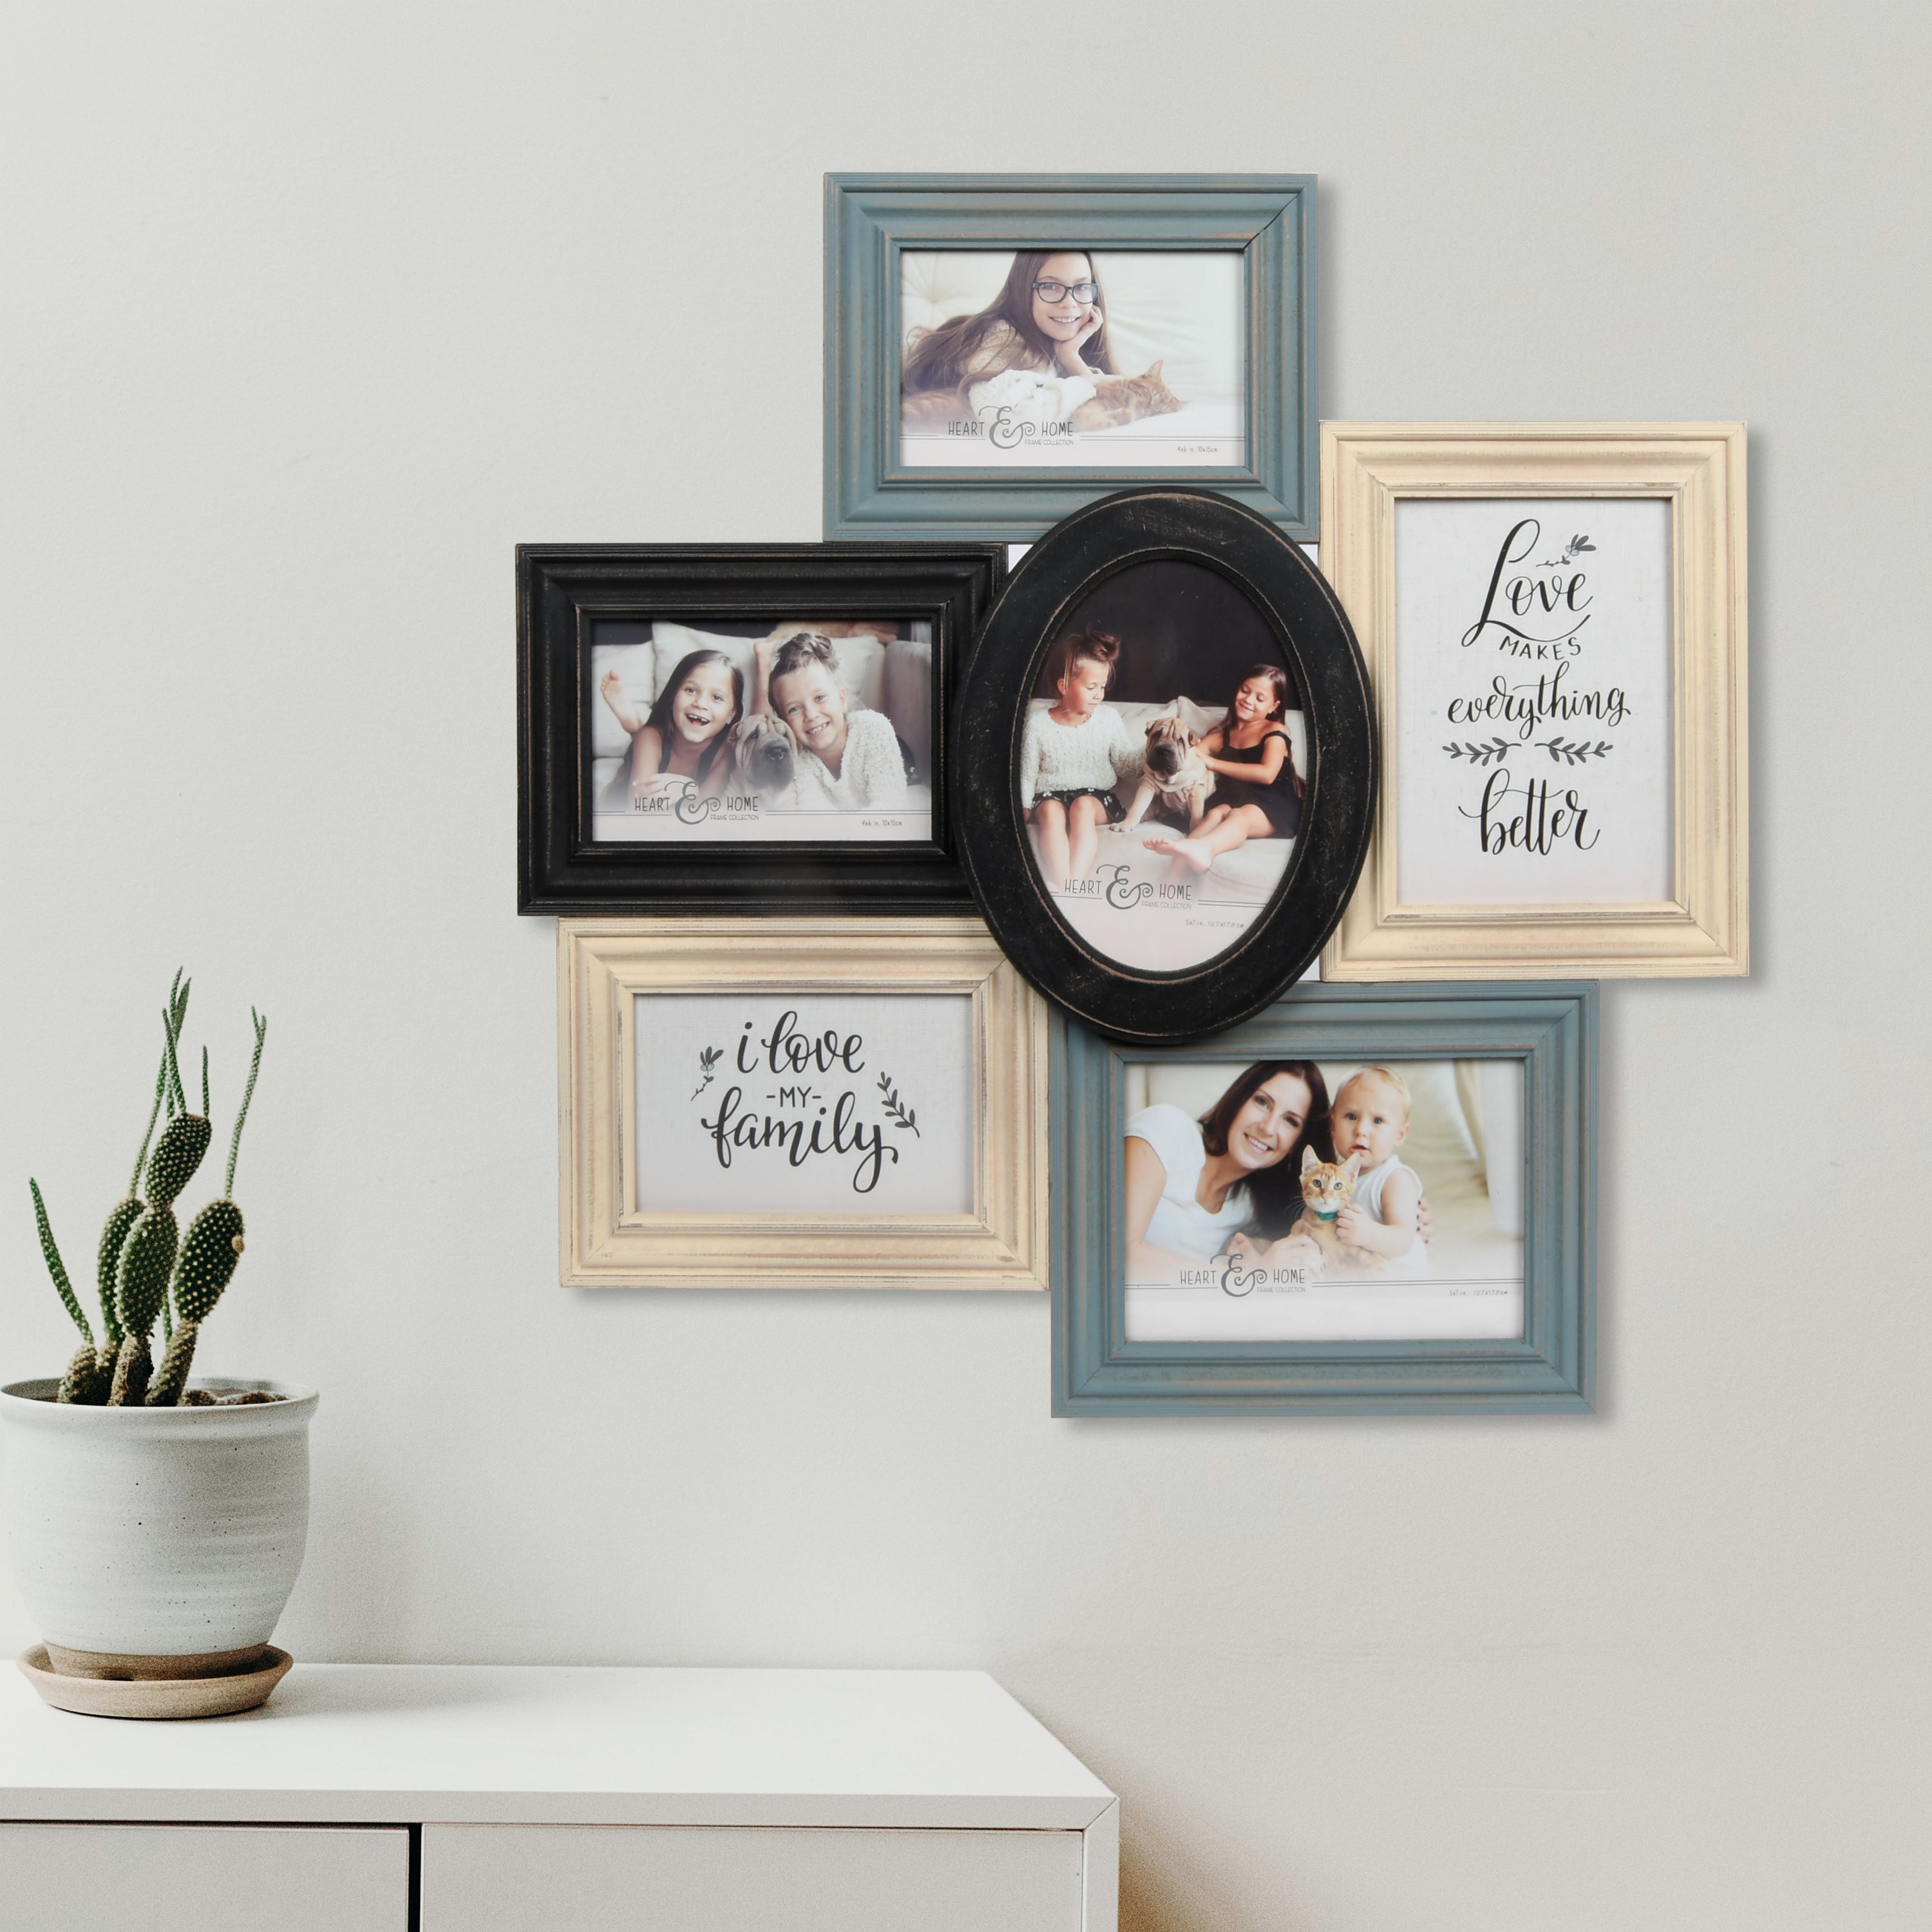 Multi-Shaped Wood 6 Opening Collage Picture Frame, Gray-Ivory